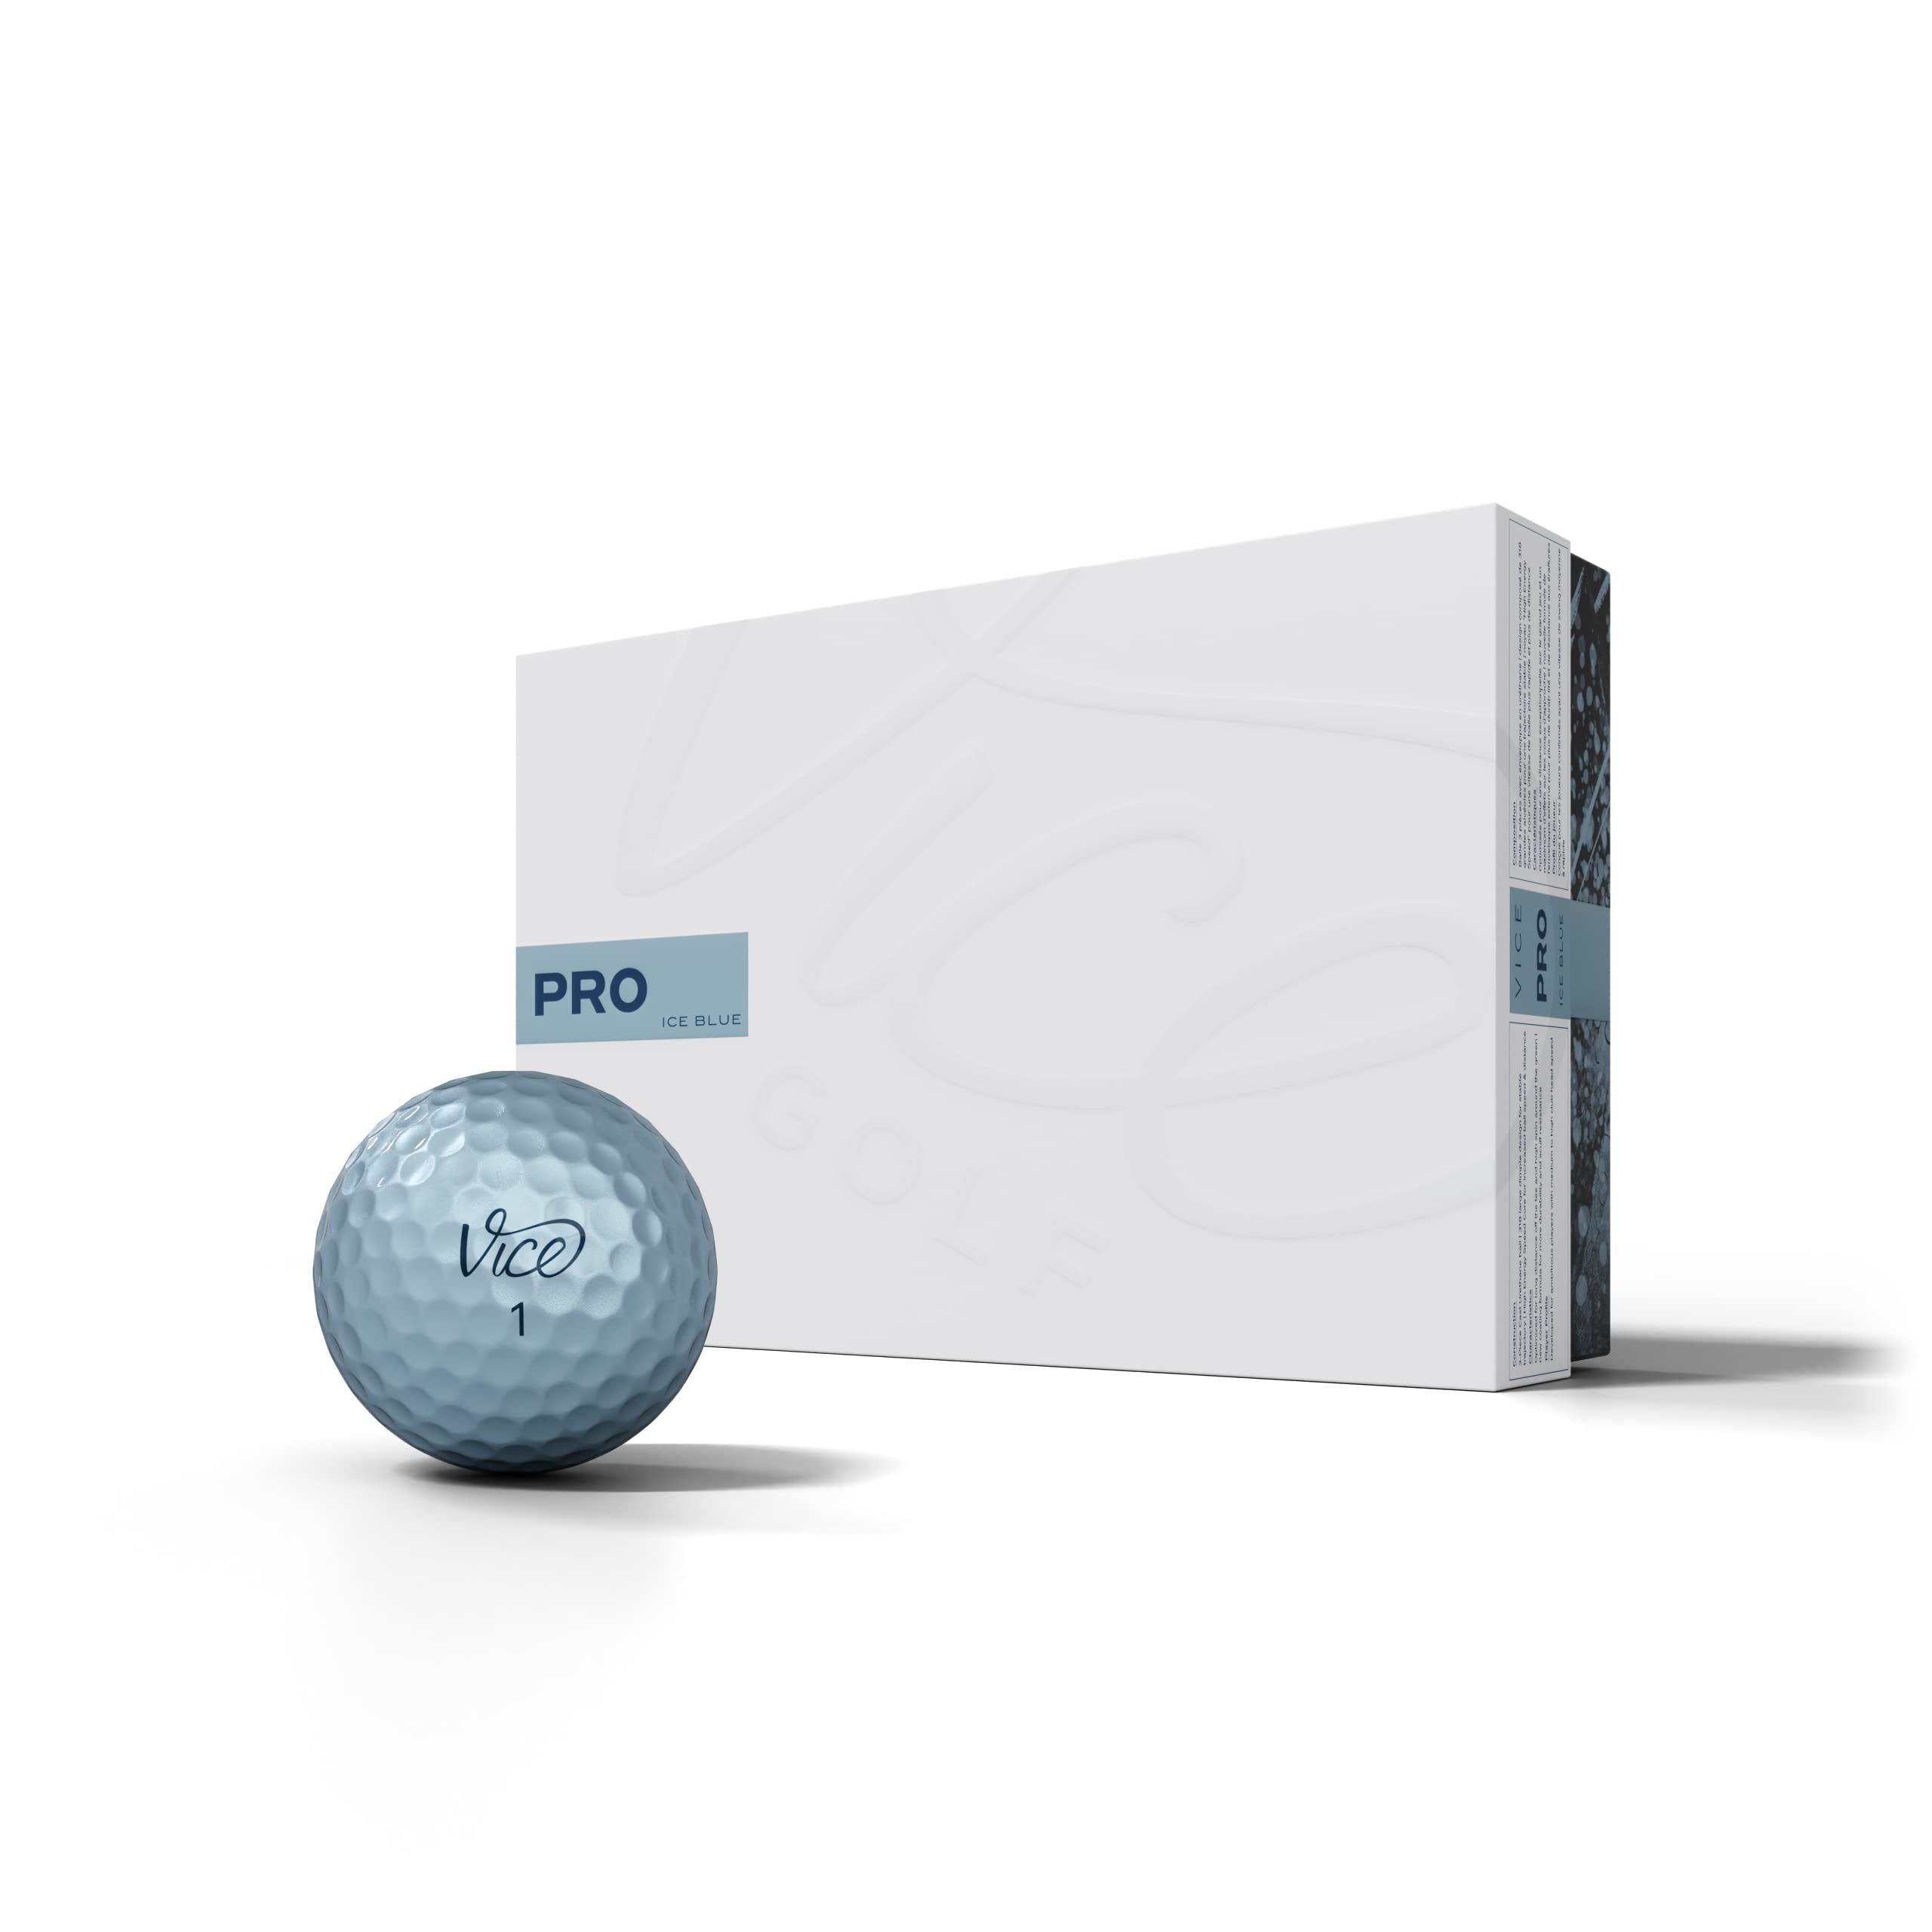 Vice Golf PRO ICE Blue | Features: 3-Piece cast Urethane, Maximum Control, high Short Game Spin | Profile: Designed for Advanced Golfers